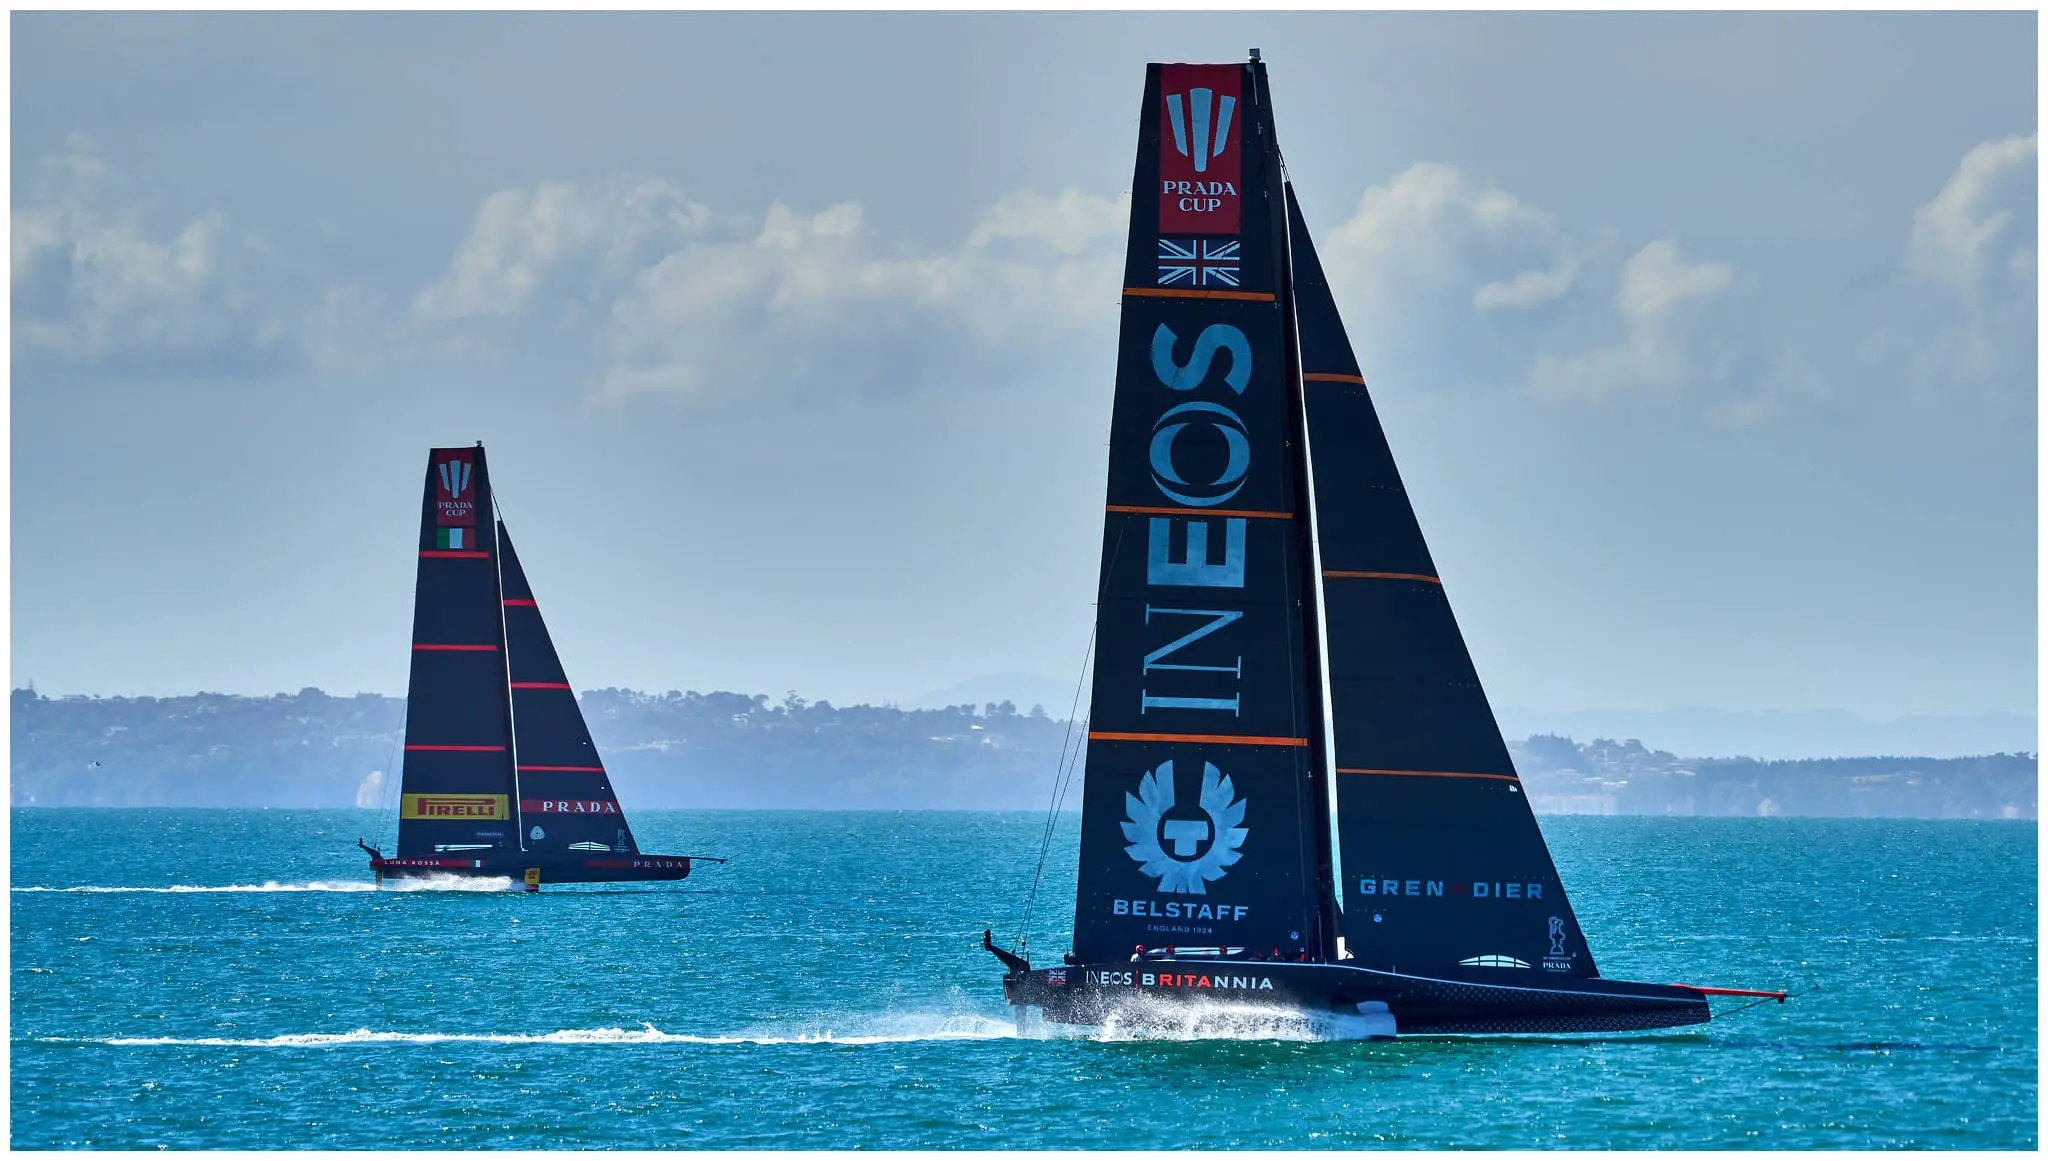 Ineos at the nz america's cup